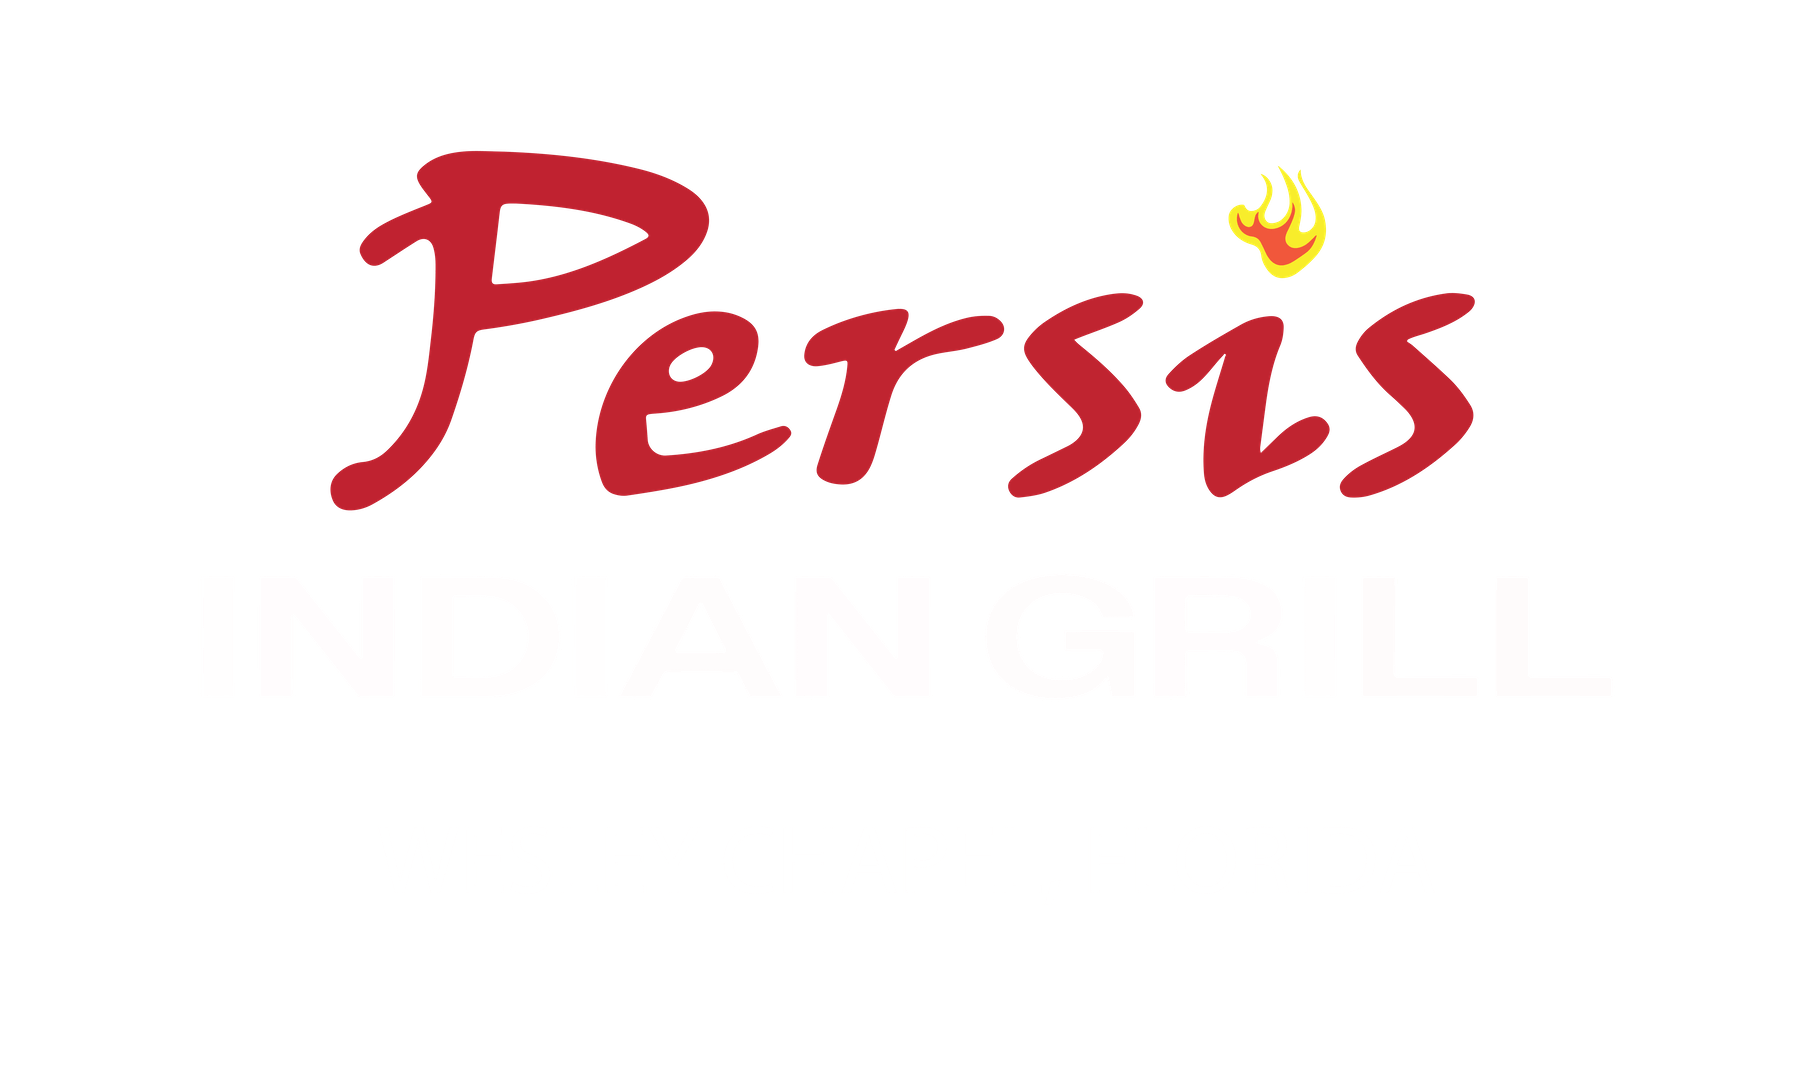 Persis Indian grill Home